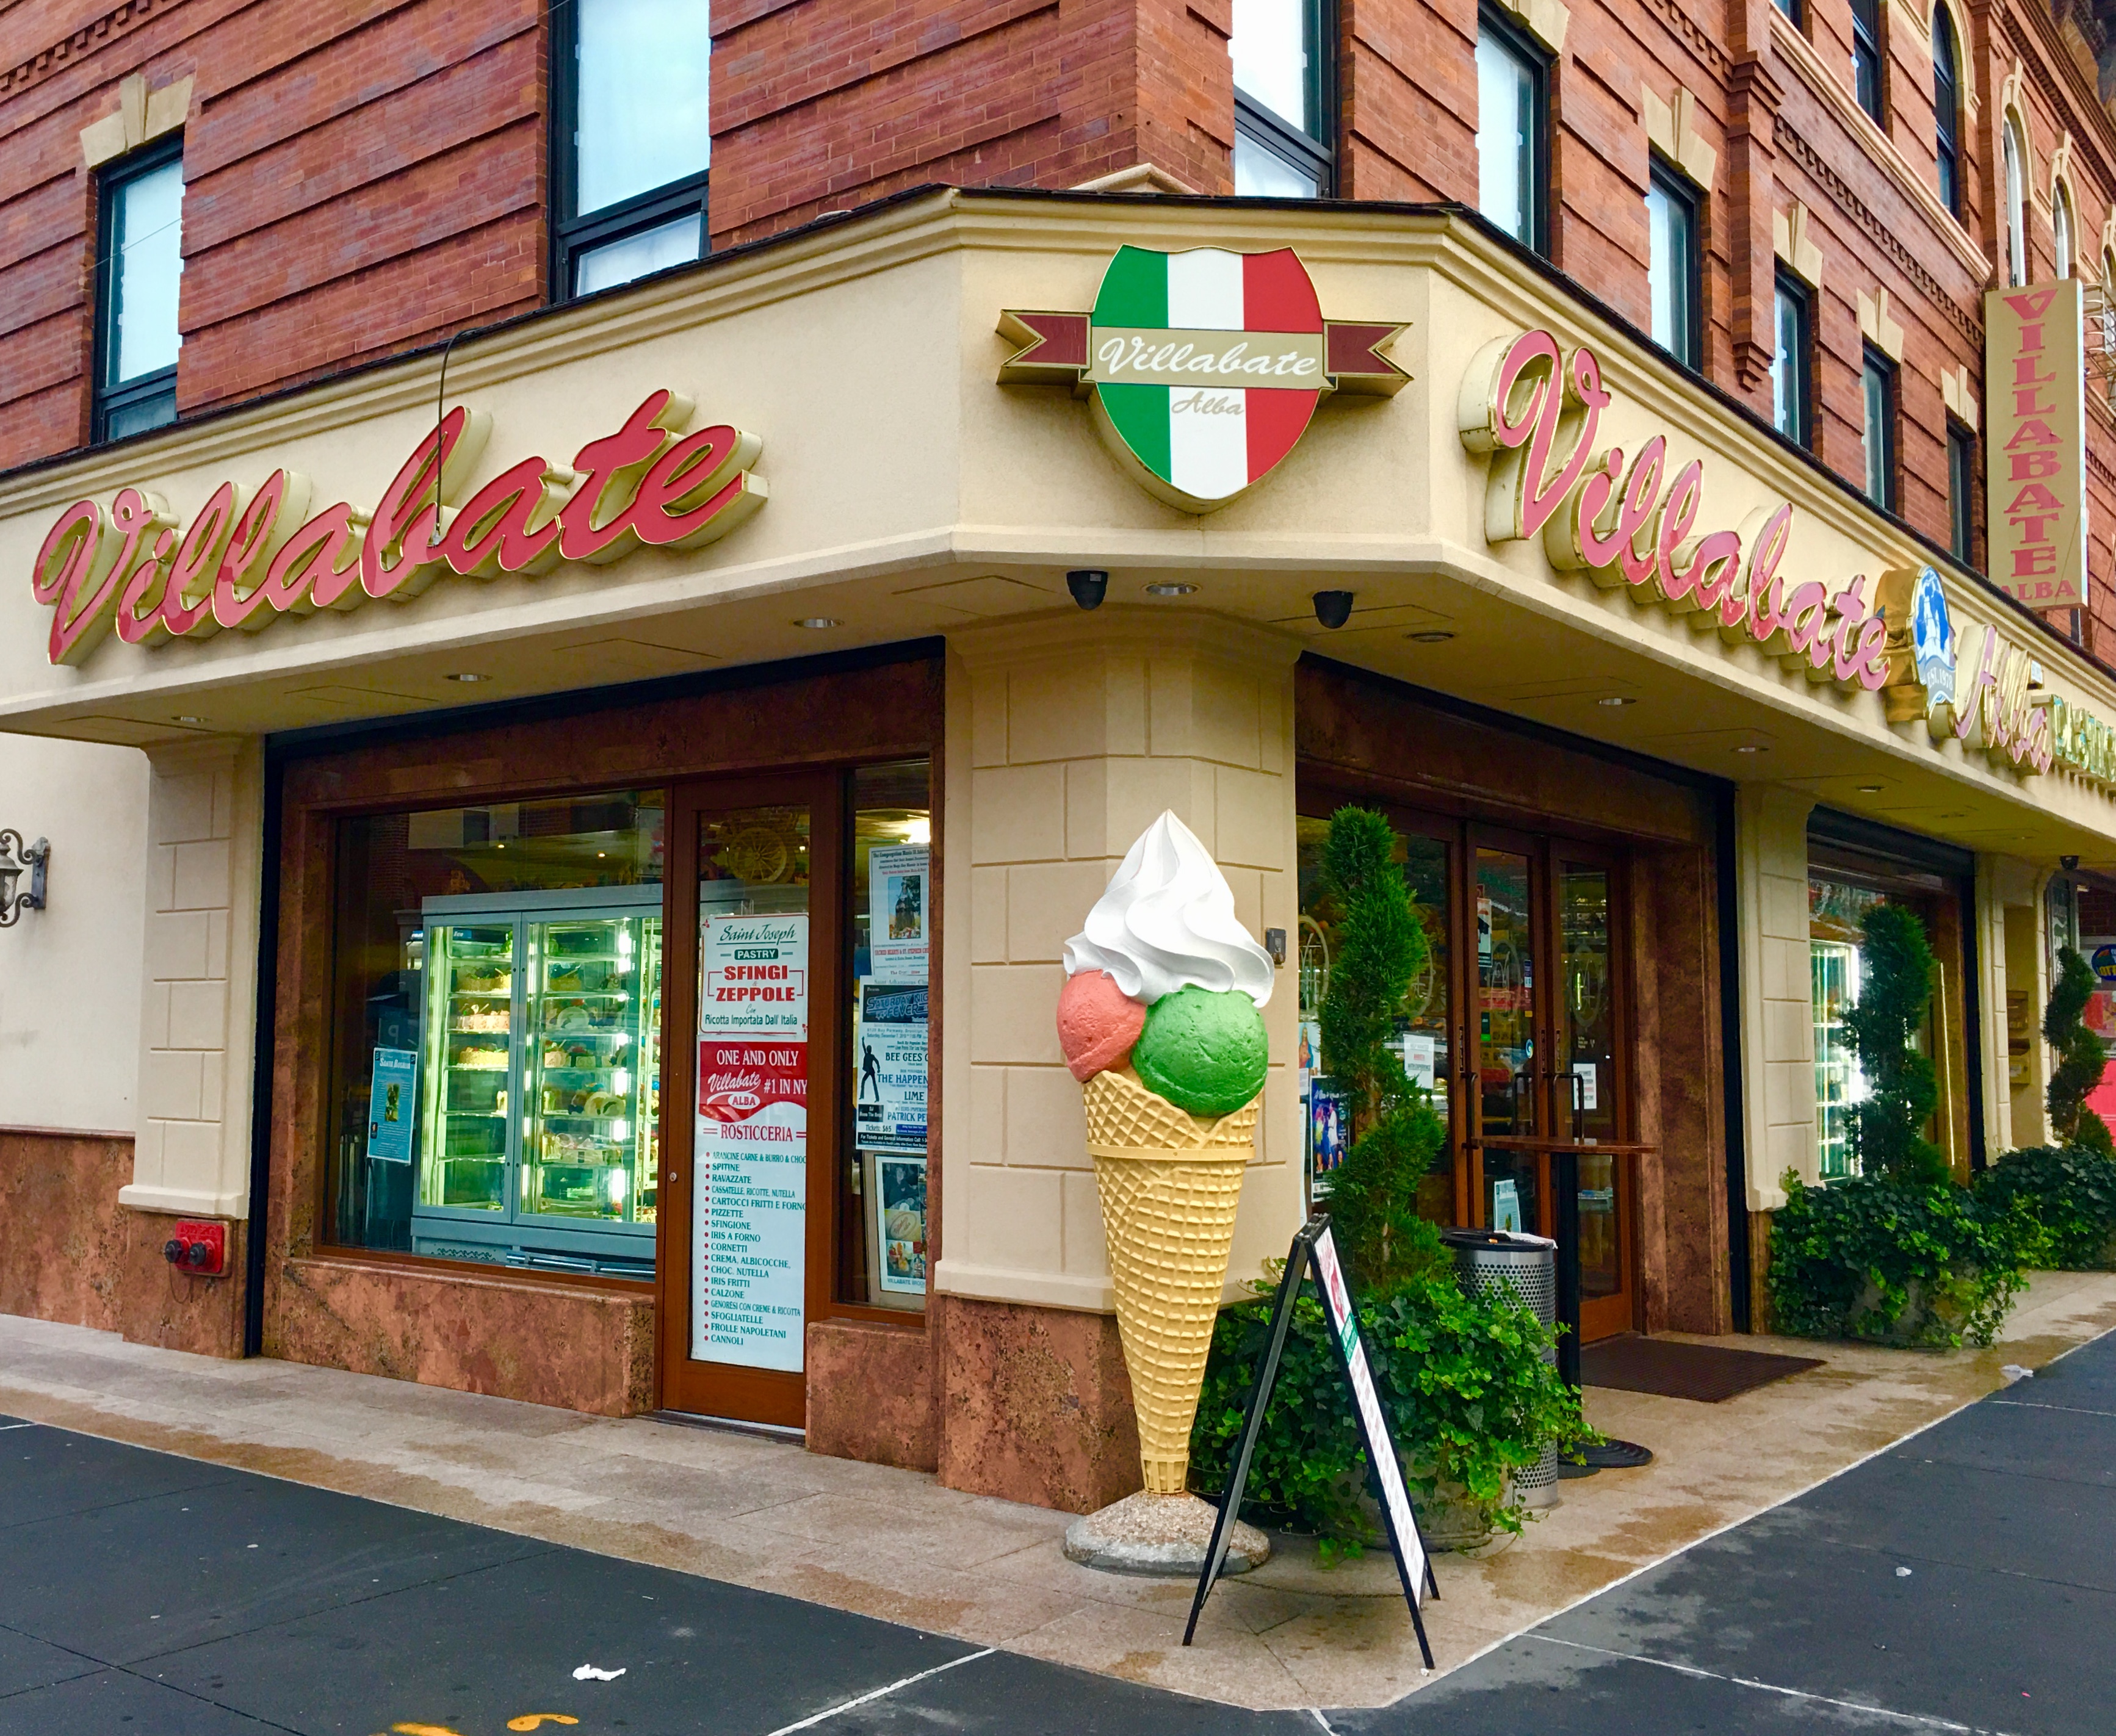 Gelato’s a big seller at Villabate Alba, as the giant cone outside the shop suggests. Eagle photo by Lore Croghan